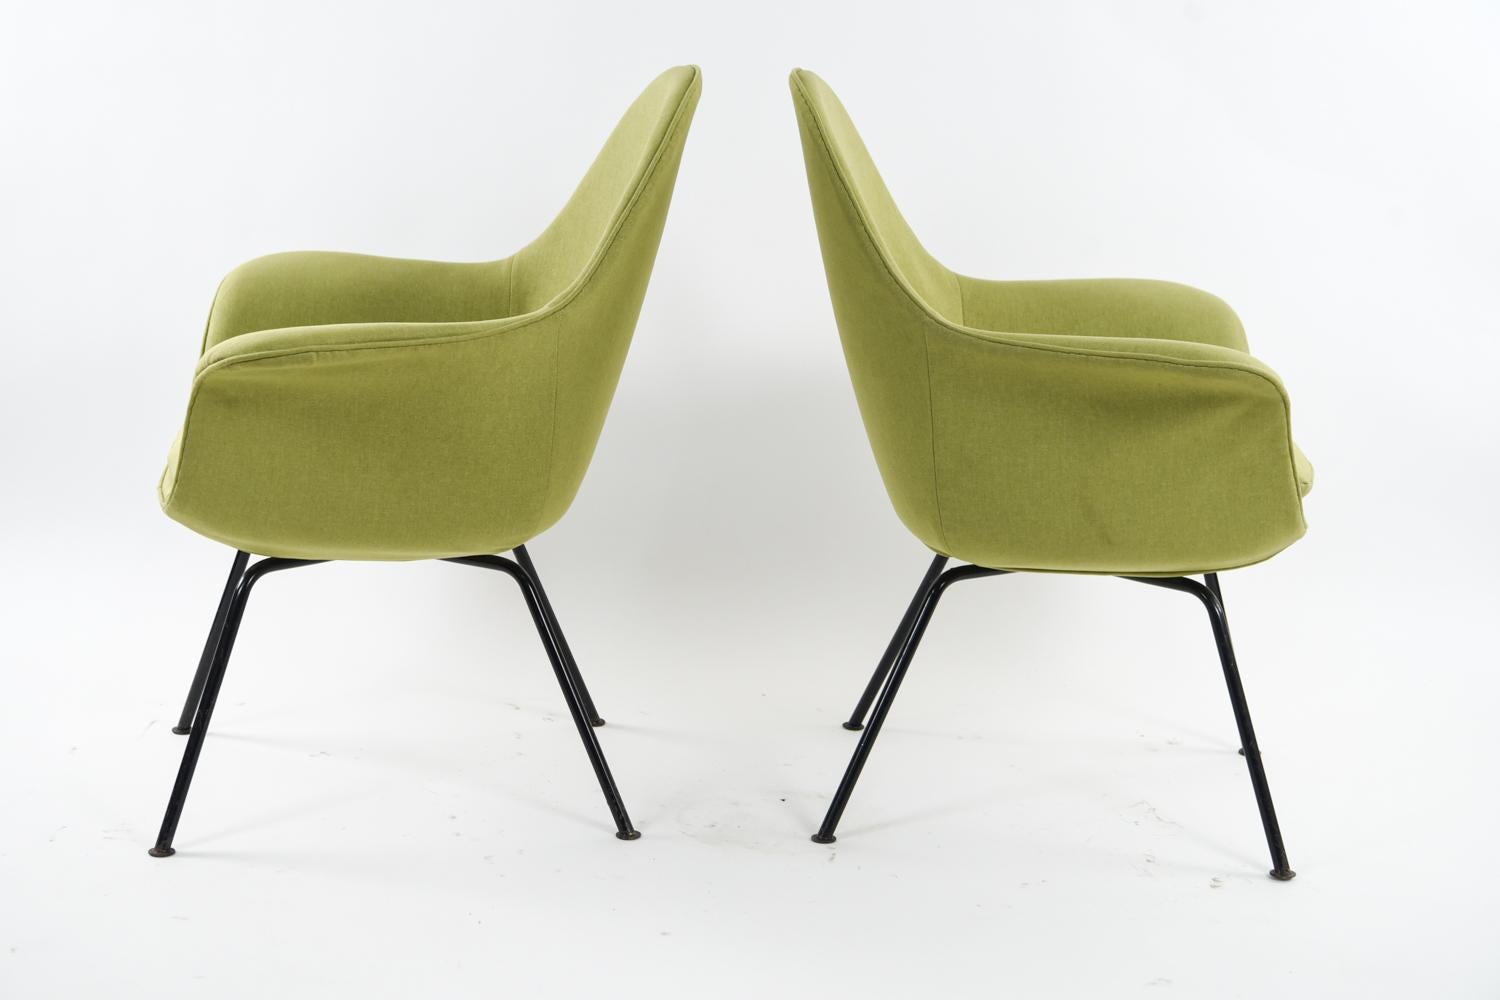 Swiss Pair of Lounge Chairs by Hans Bellman for Strässle, circa 1954